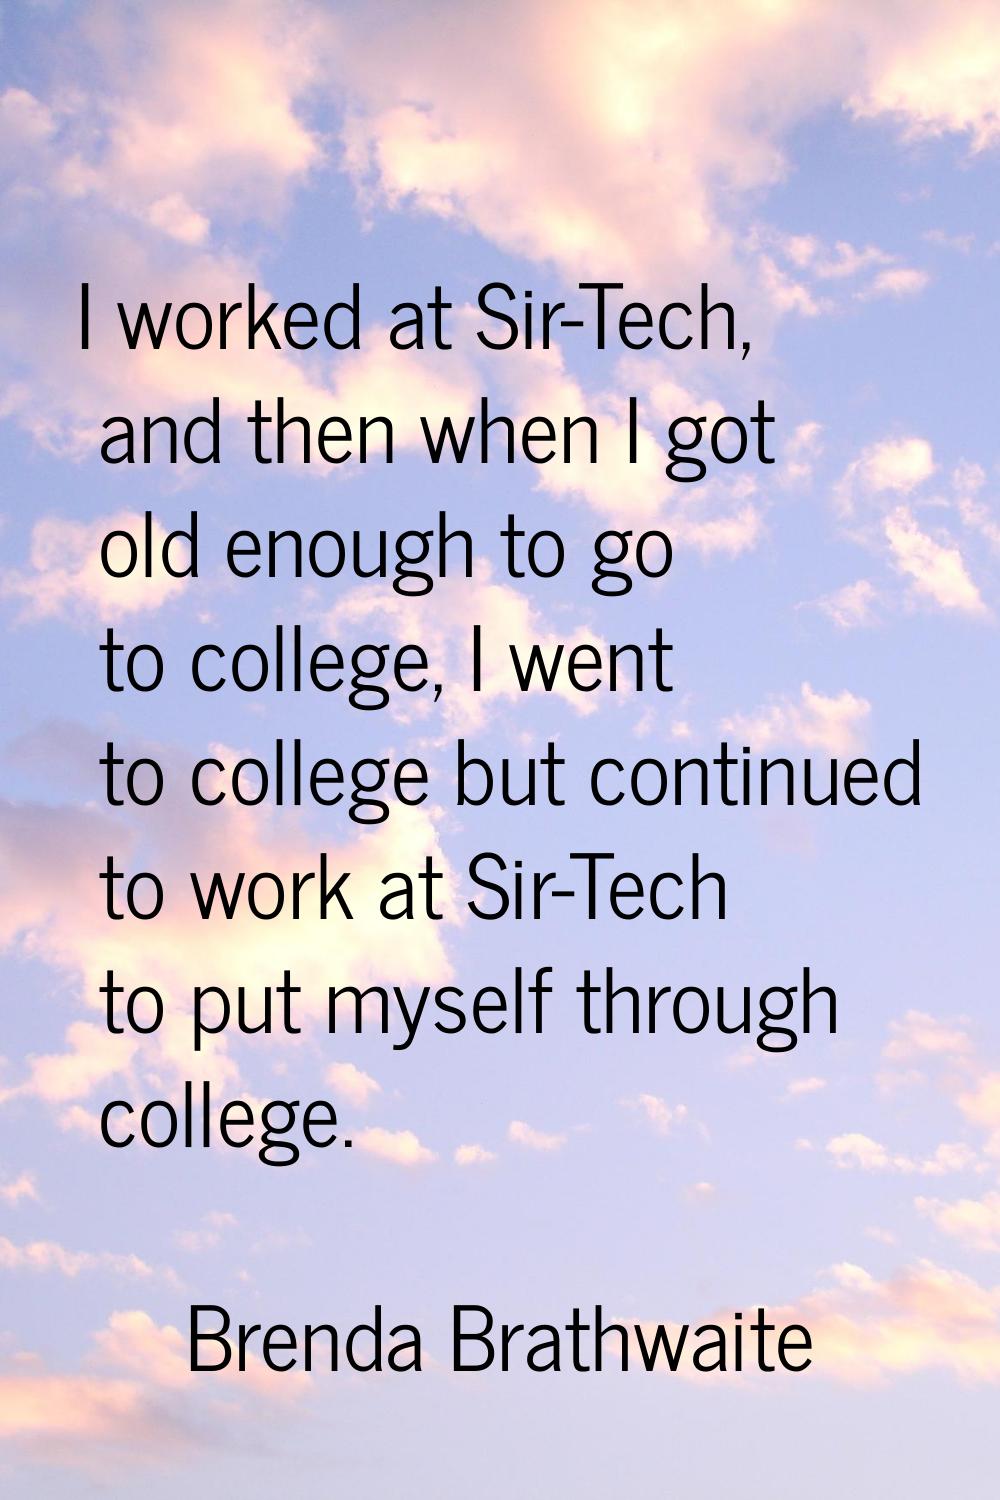 I worked at Sir-Tech, and then when I got old enough to go to college, I went to college but contin